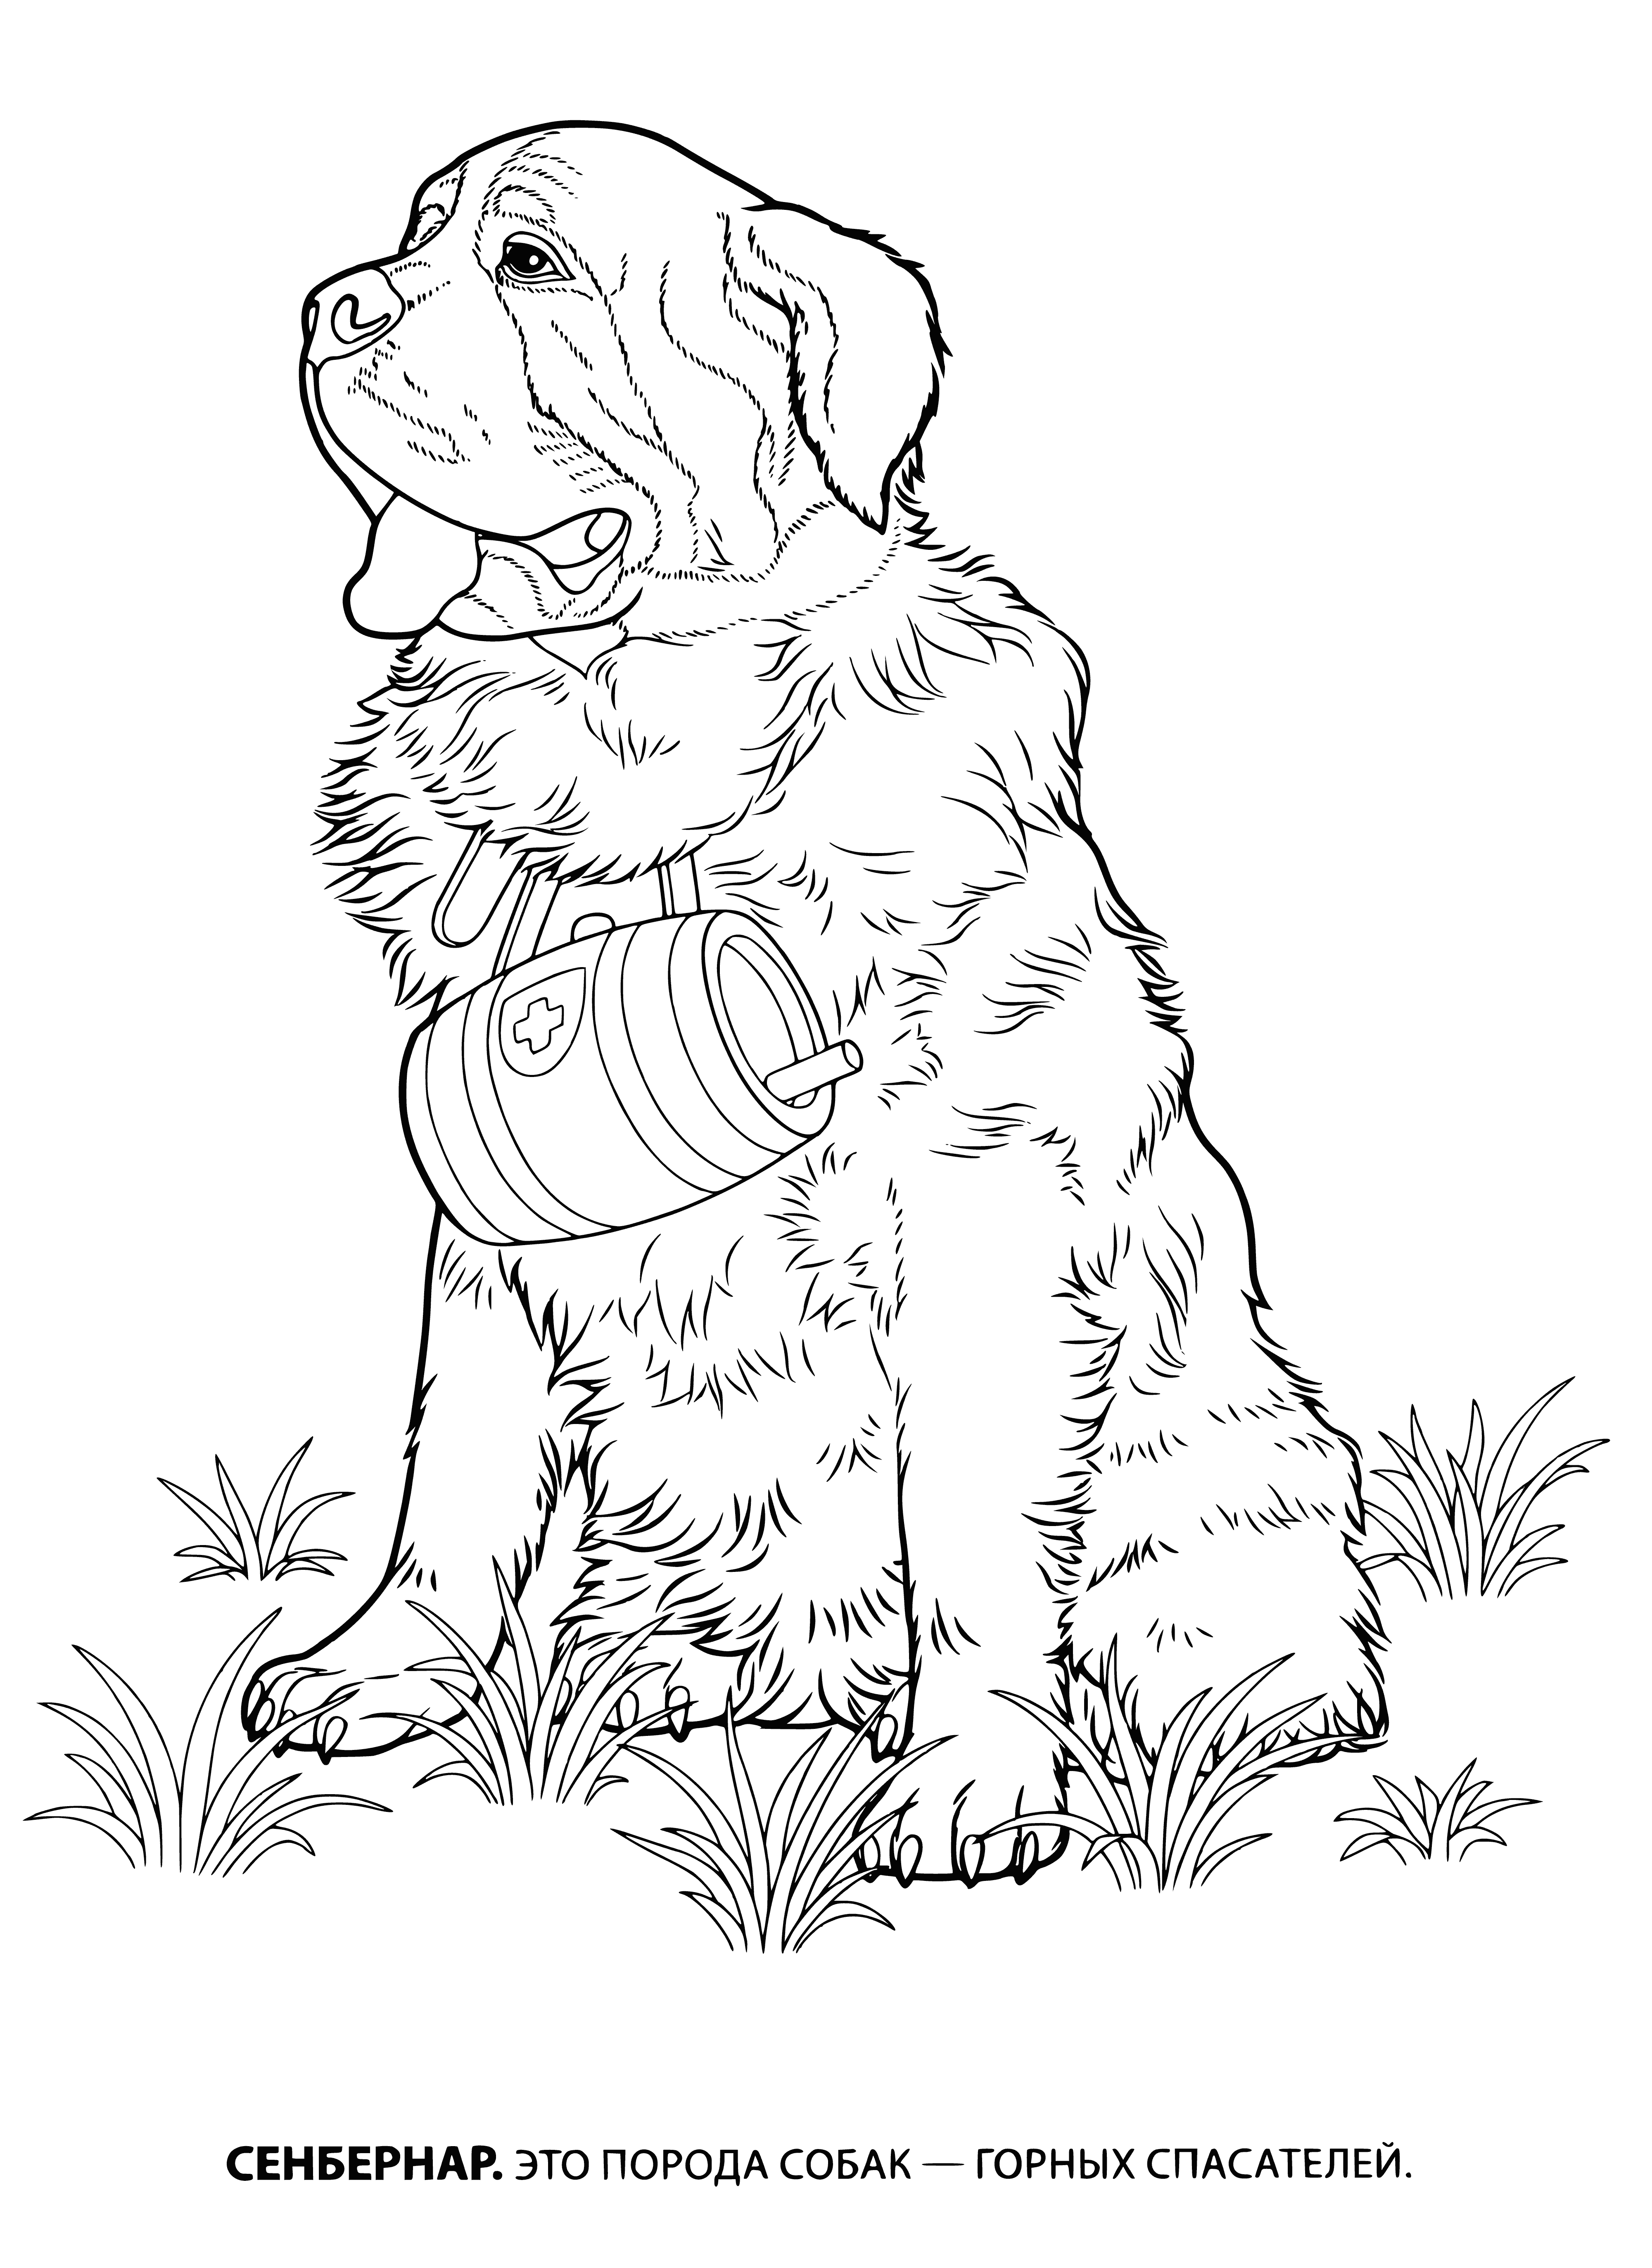 coloring page: Two dogs, one brown and one white, standing on a sidewalk, looking into the camera.